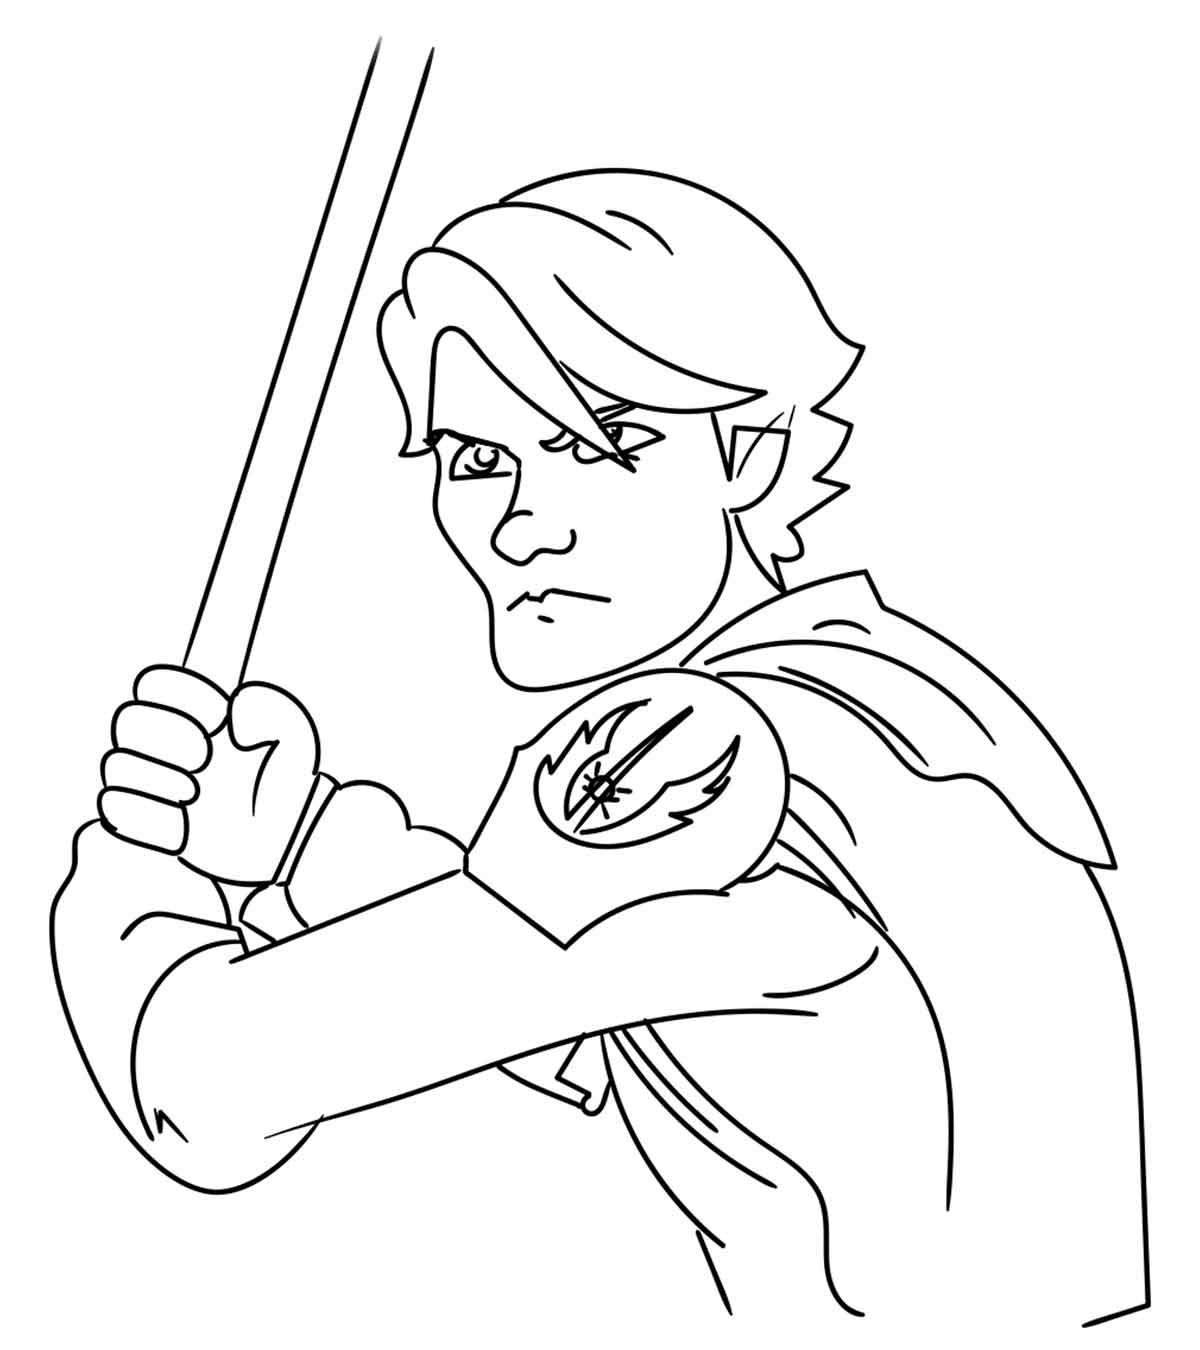 Super Heros Coloring Pages MomJunction